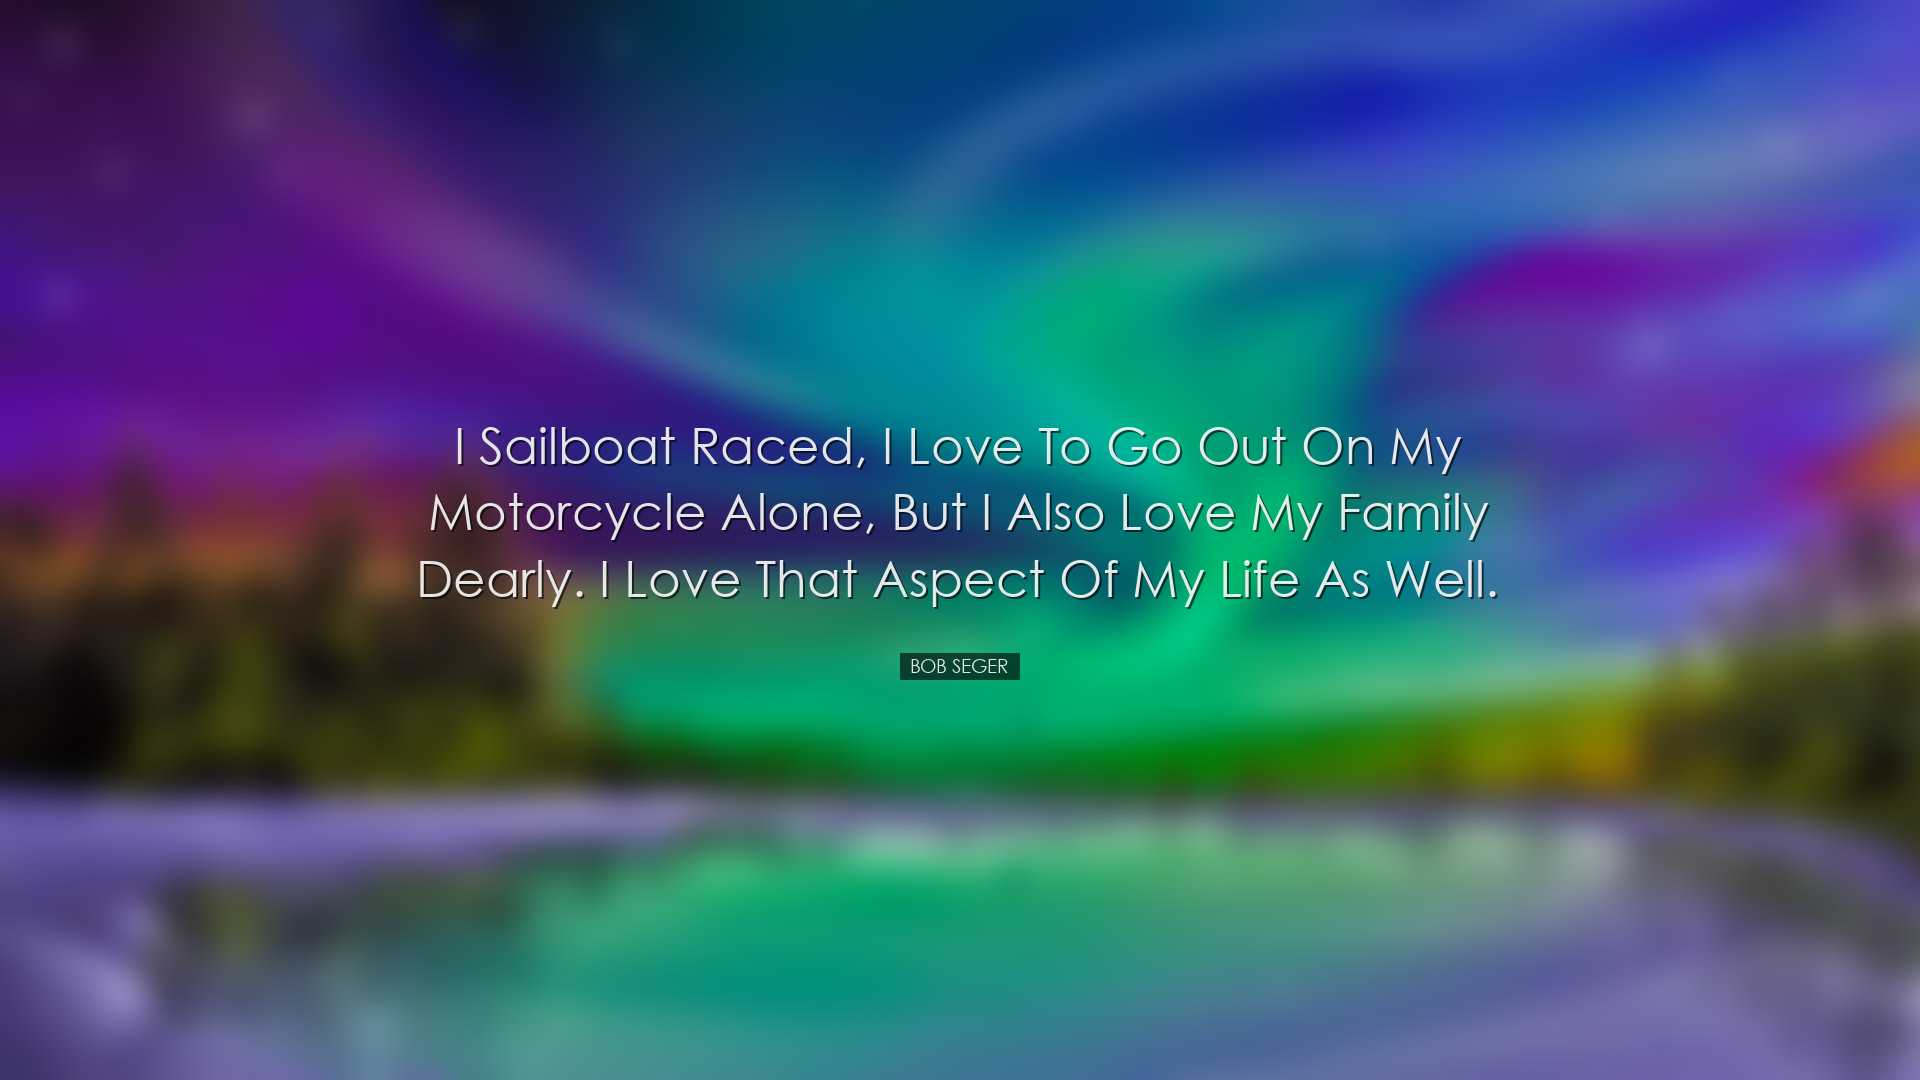 I sailboat raced, I love to go out on my motorcycle alone, but I a